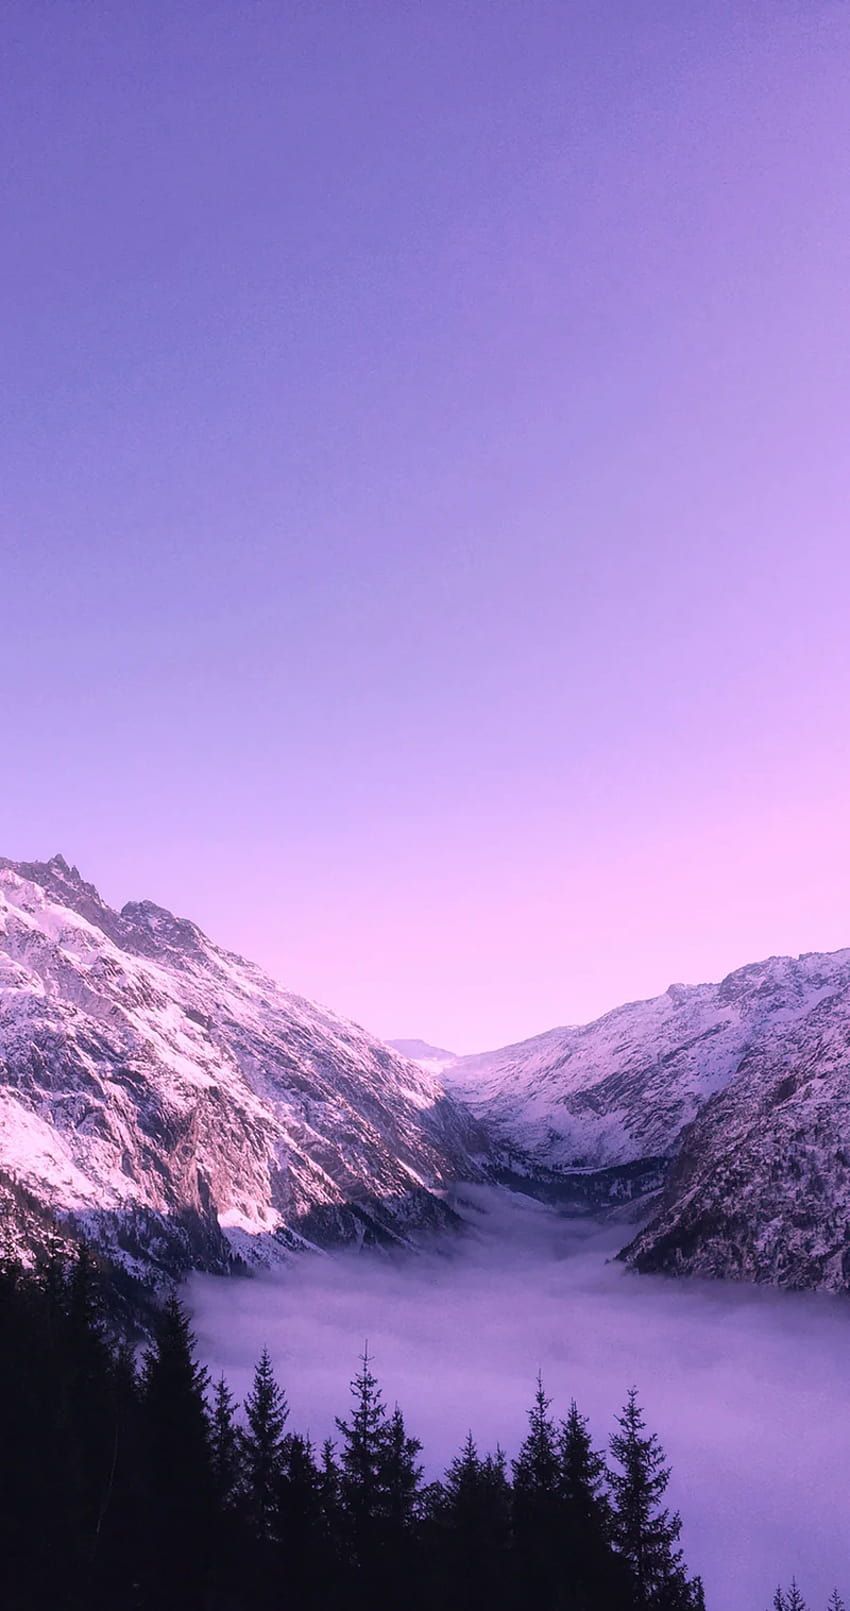 IPhone wallpaper of a purple sunset over a snowy mountain - Scenery